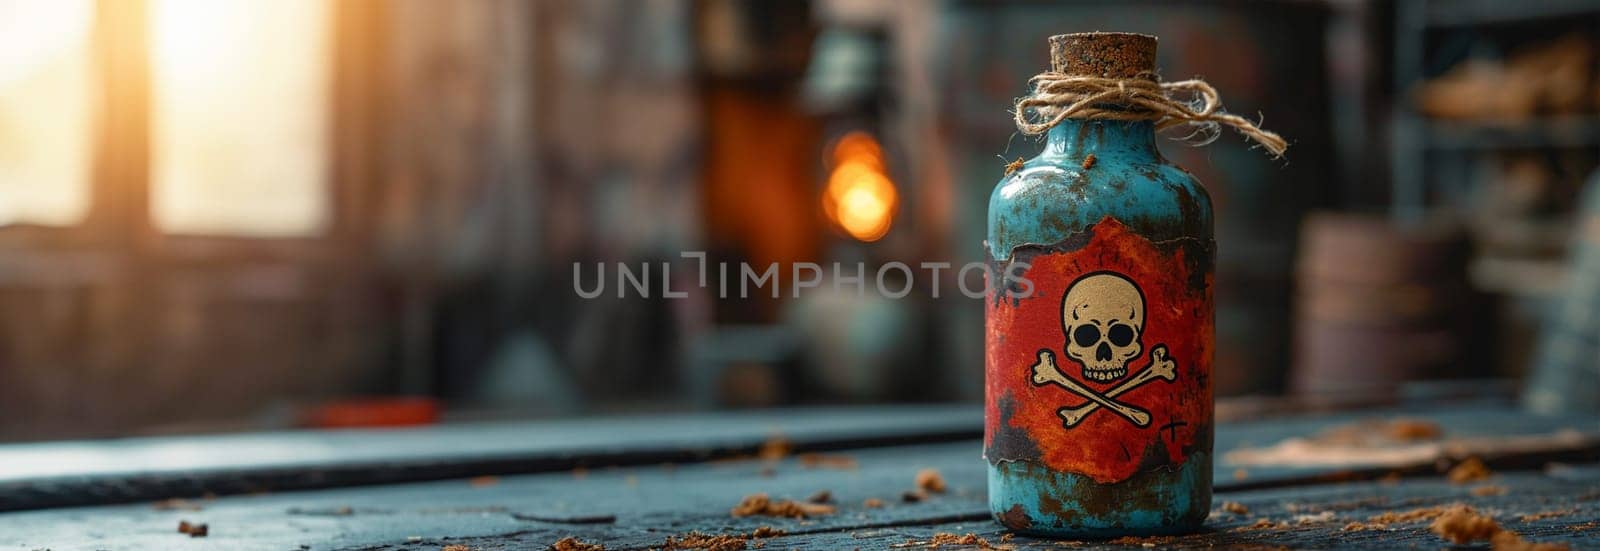 Poison bottle with skull and bones stands among pharmaceutical bottles. Danger sign, symbol of death. Concept background on poison poisoning, pharmaceutical, chemistry, medical, old science topic. by Annebel146